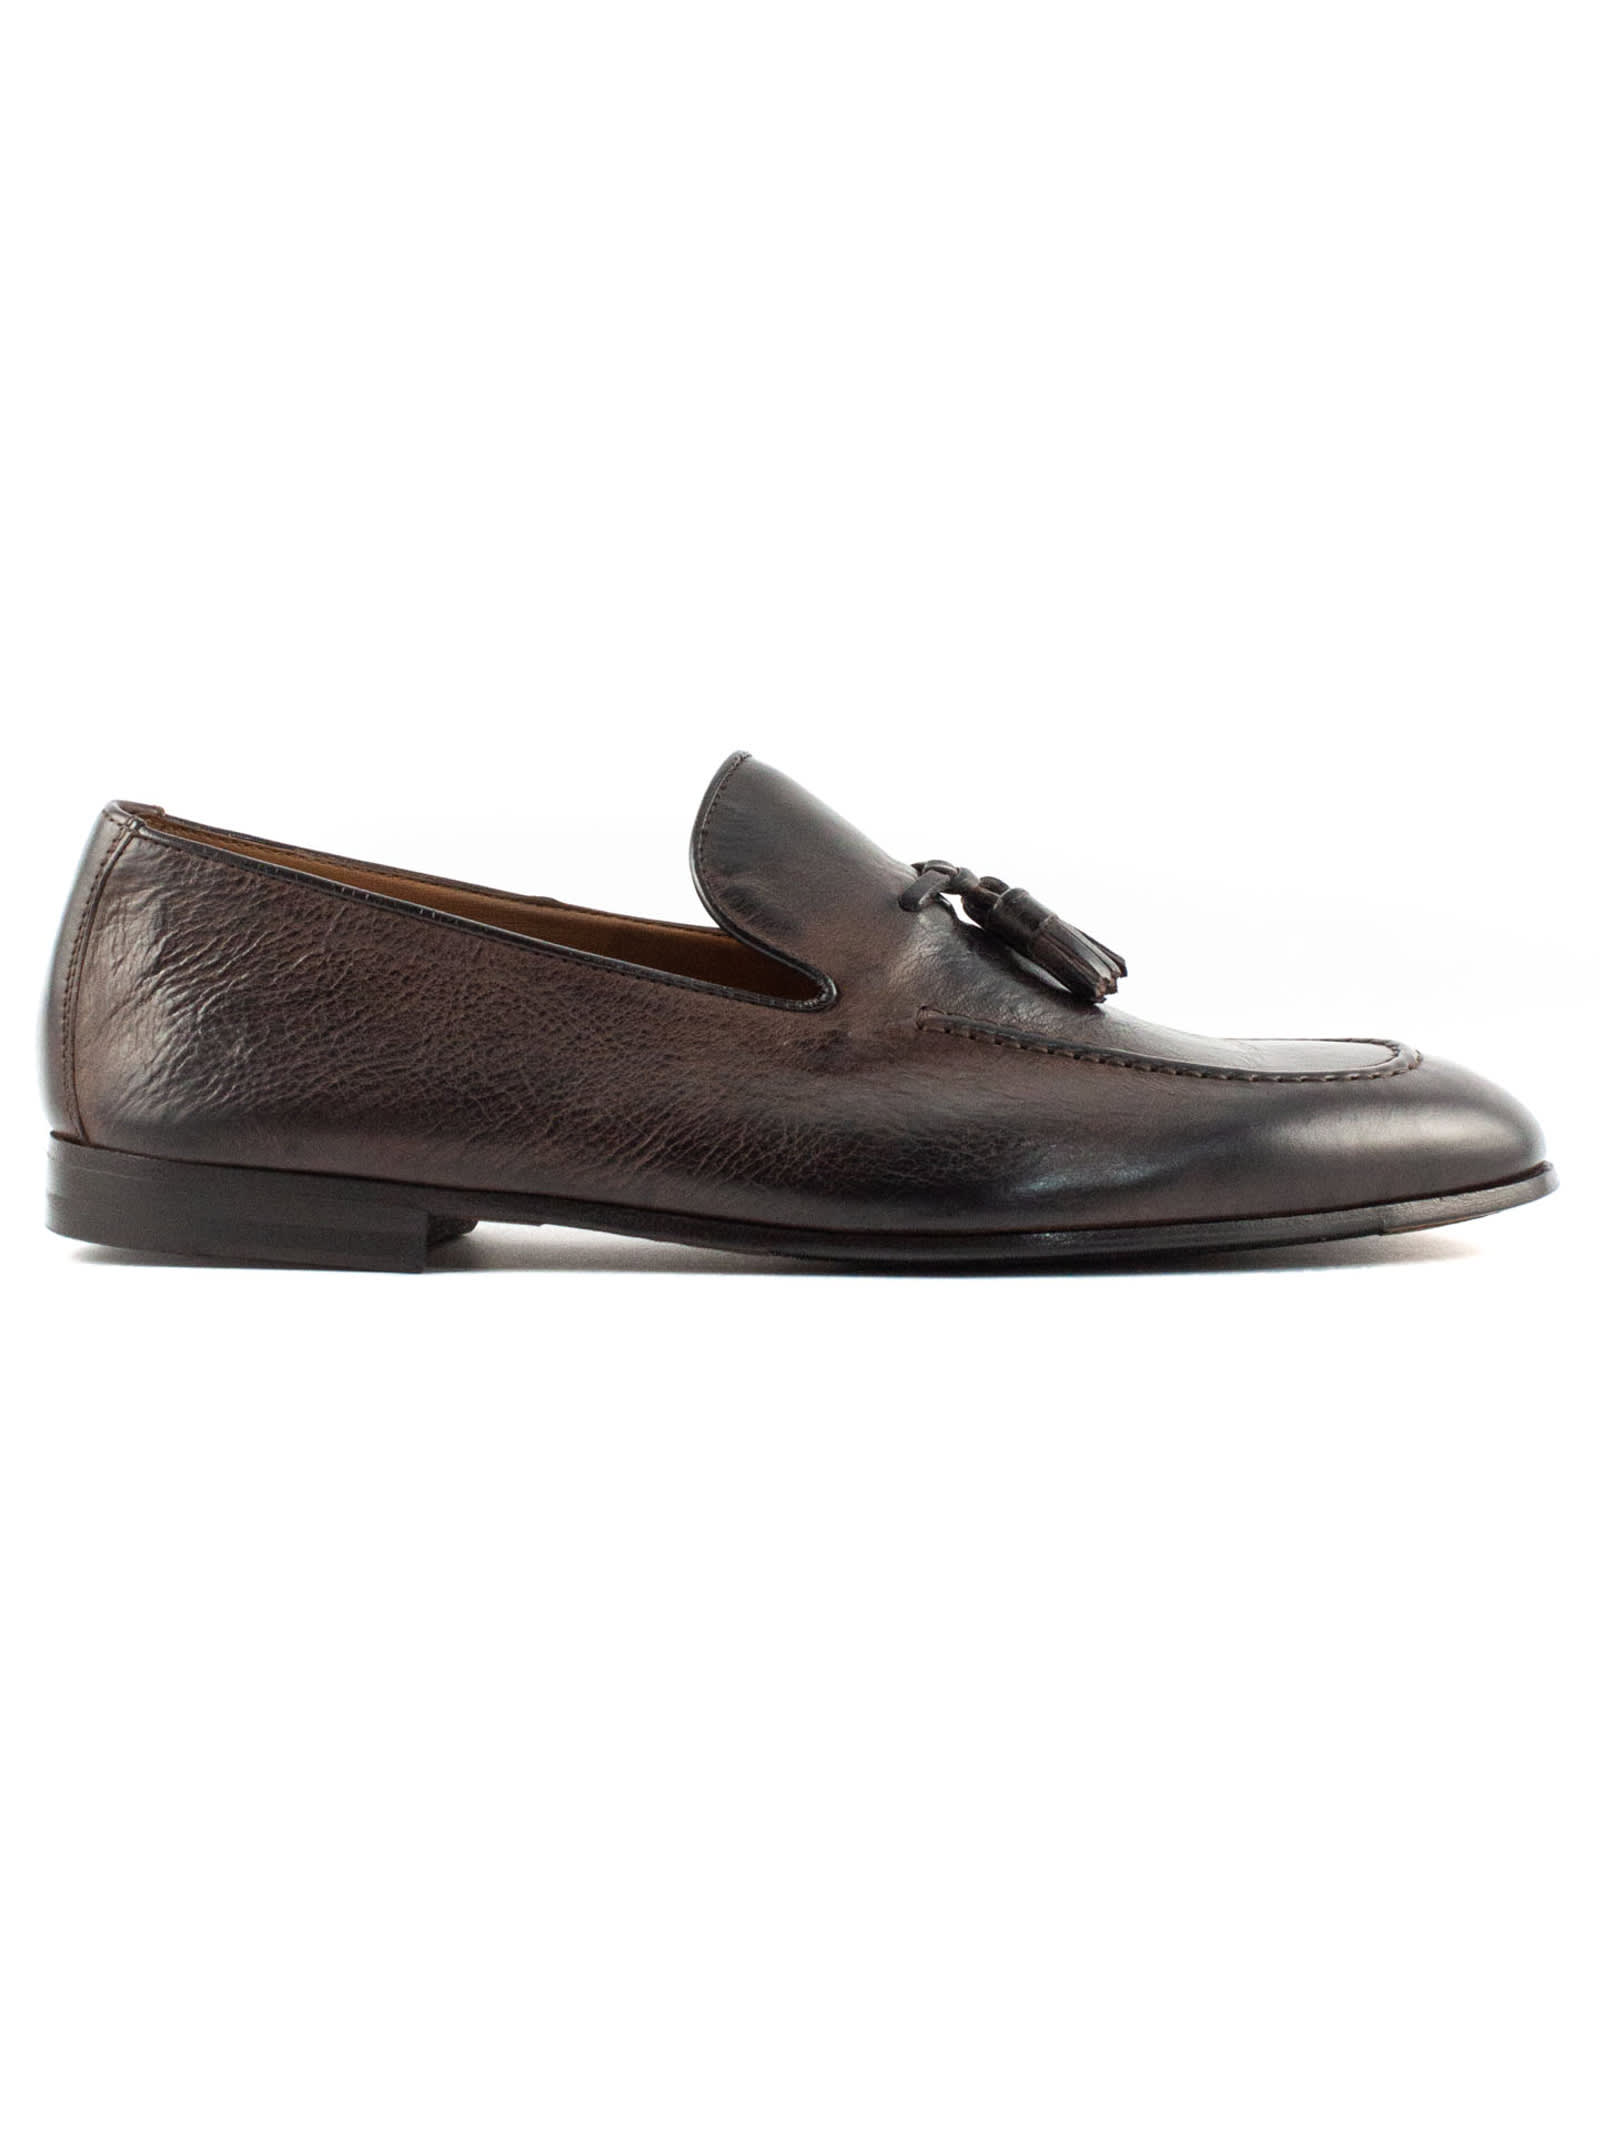 Doucal's Brown Smooth Leather Loafer